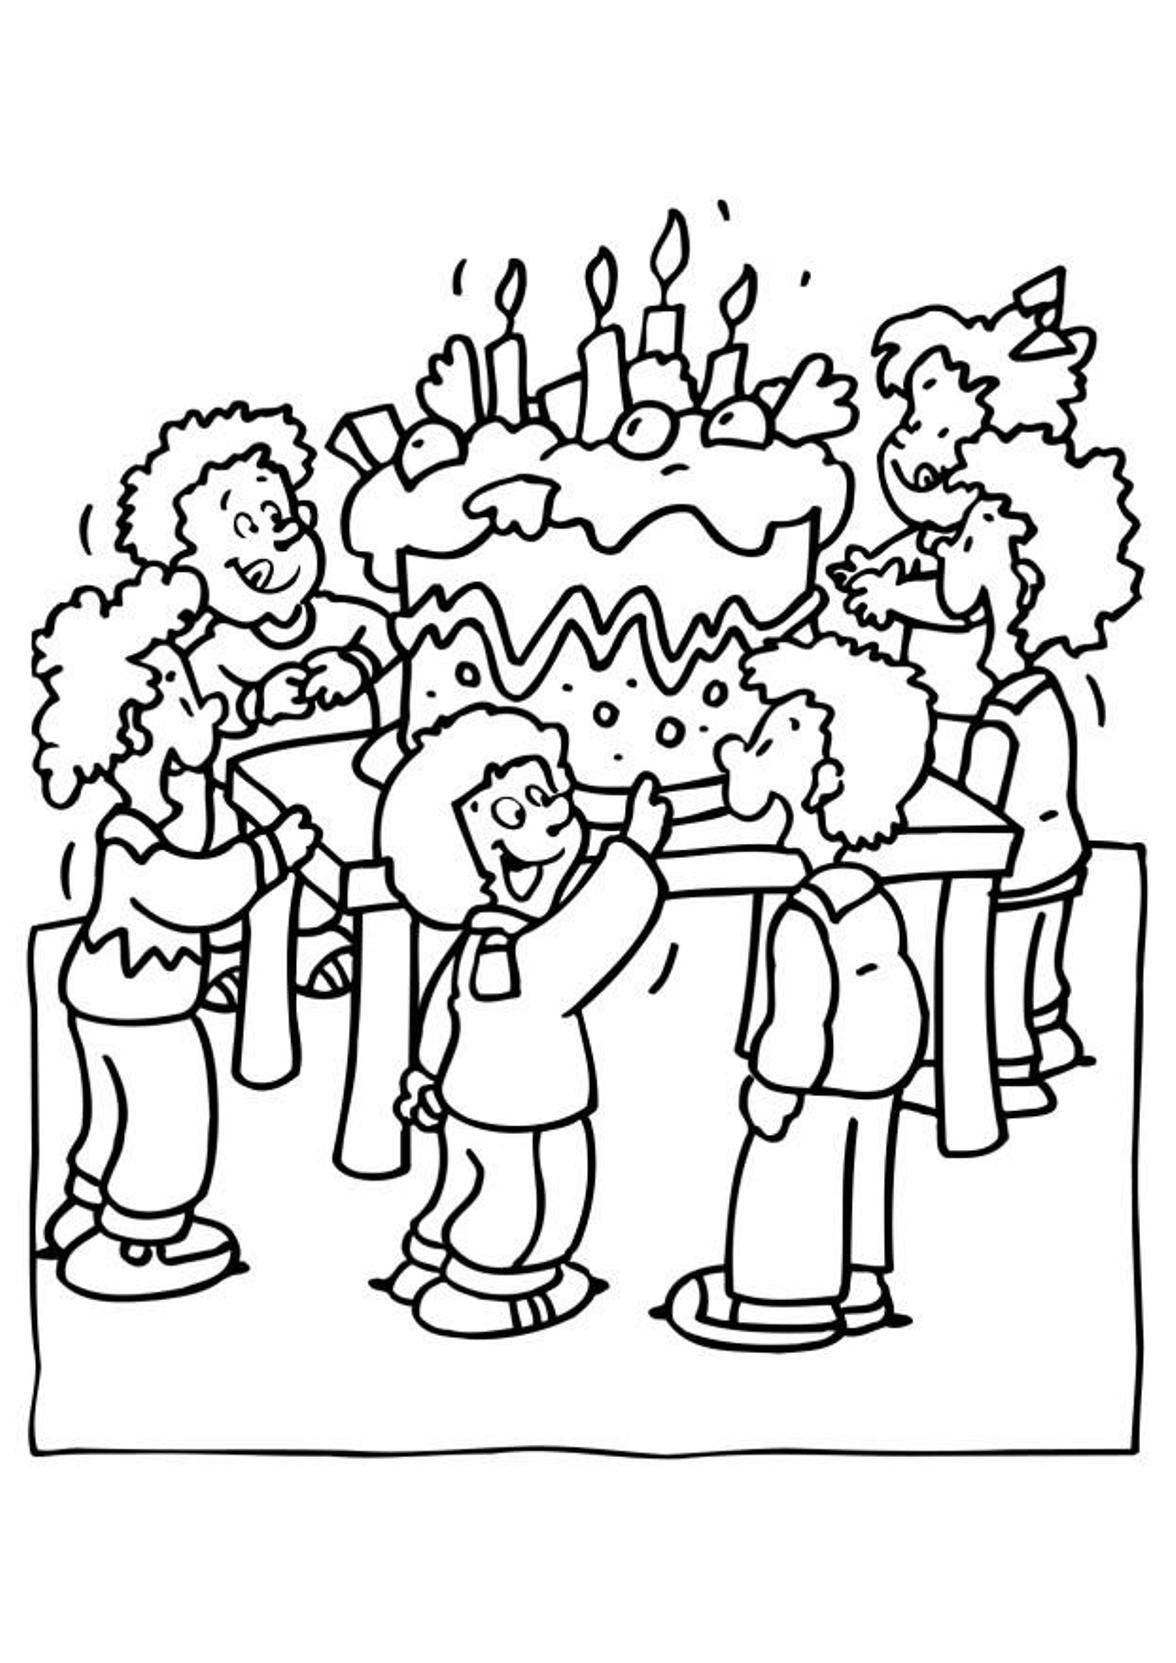 Coloring Sheets For Girls Birtdey
 Party Birthday Coloring Pages For Kids